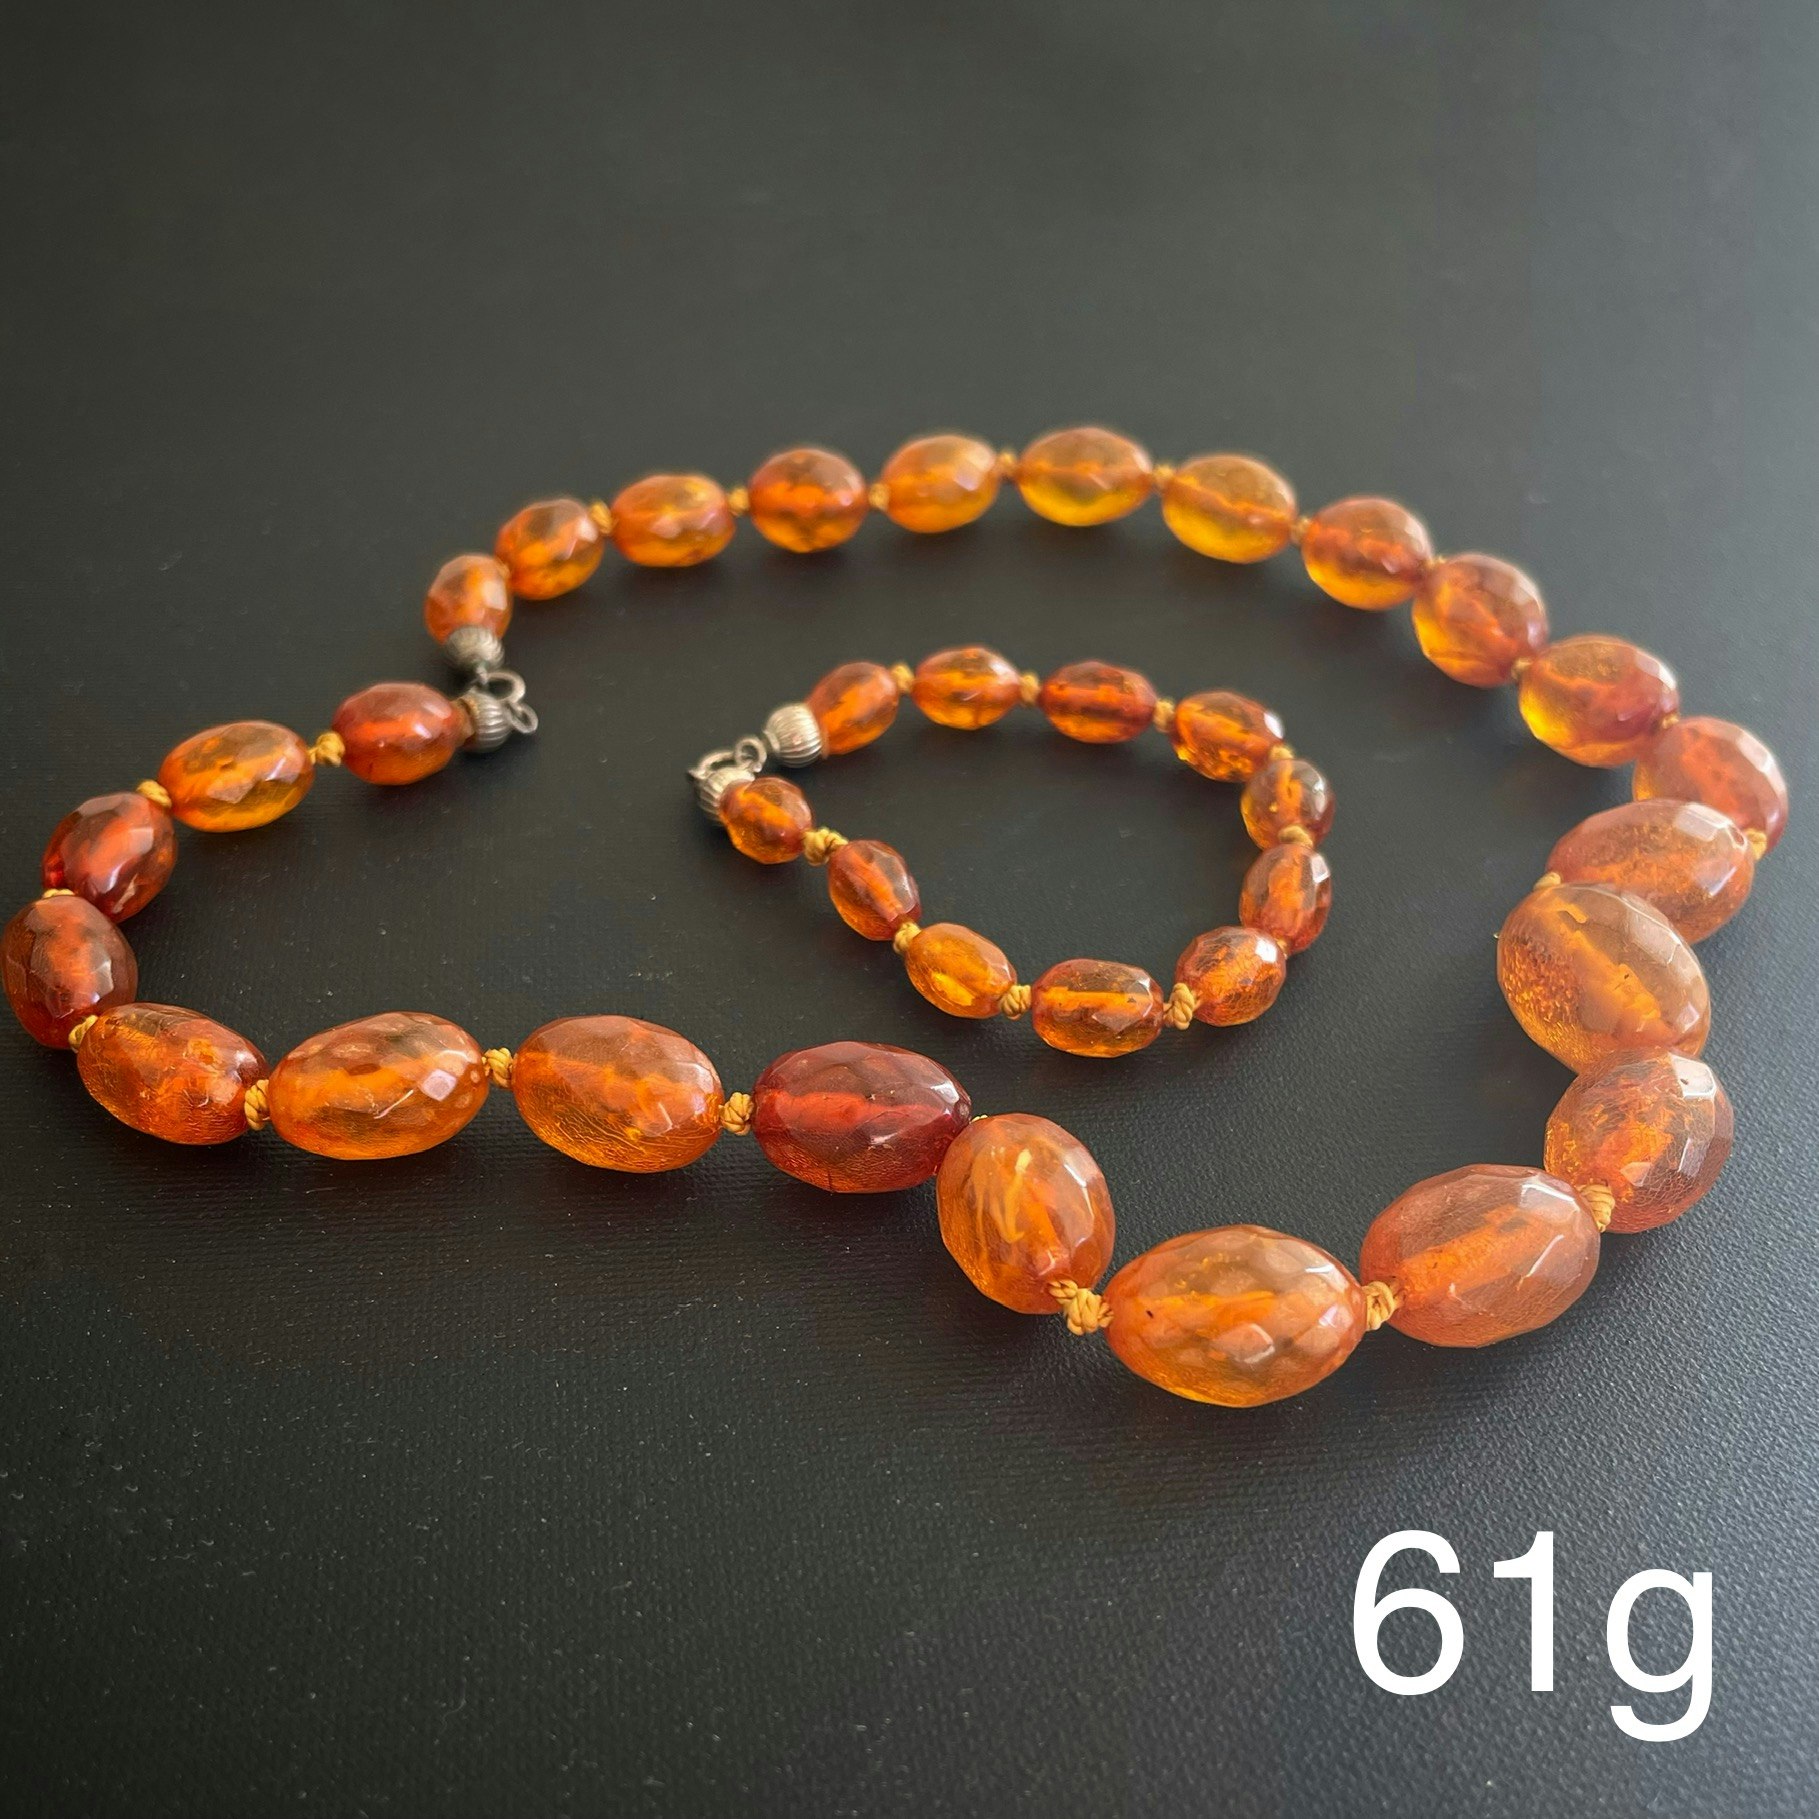 ANTIQUE NATURAL AMBER FACETED BEAD NECKLACE BRACELET FROM DENMARK 1950s #1866